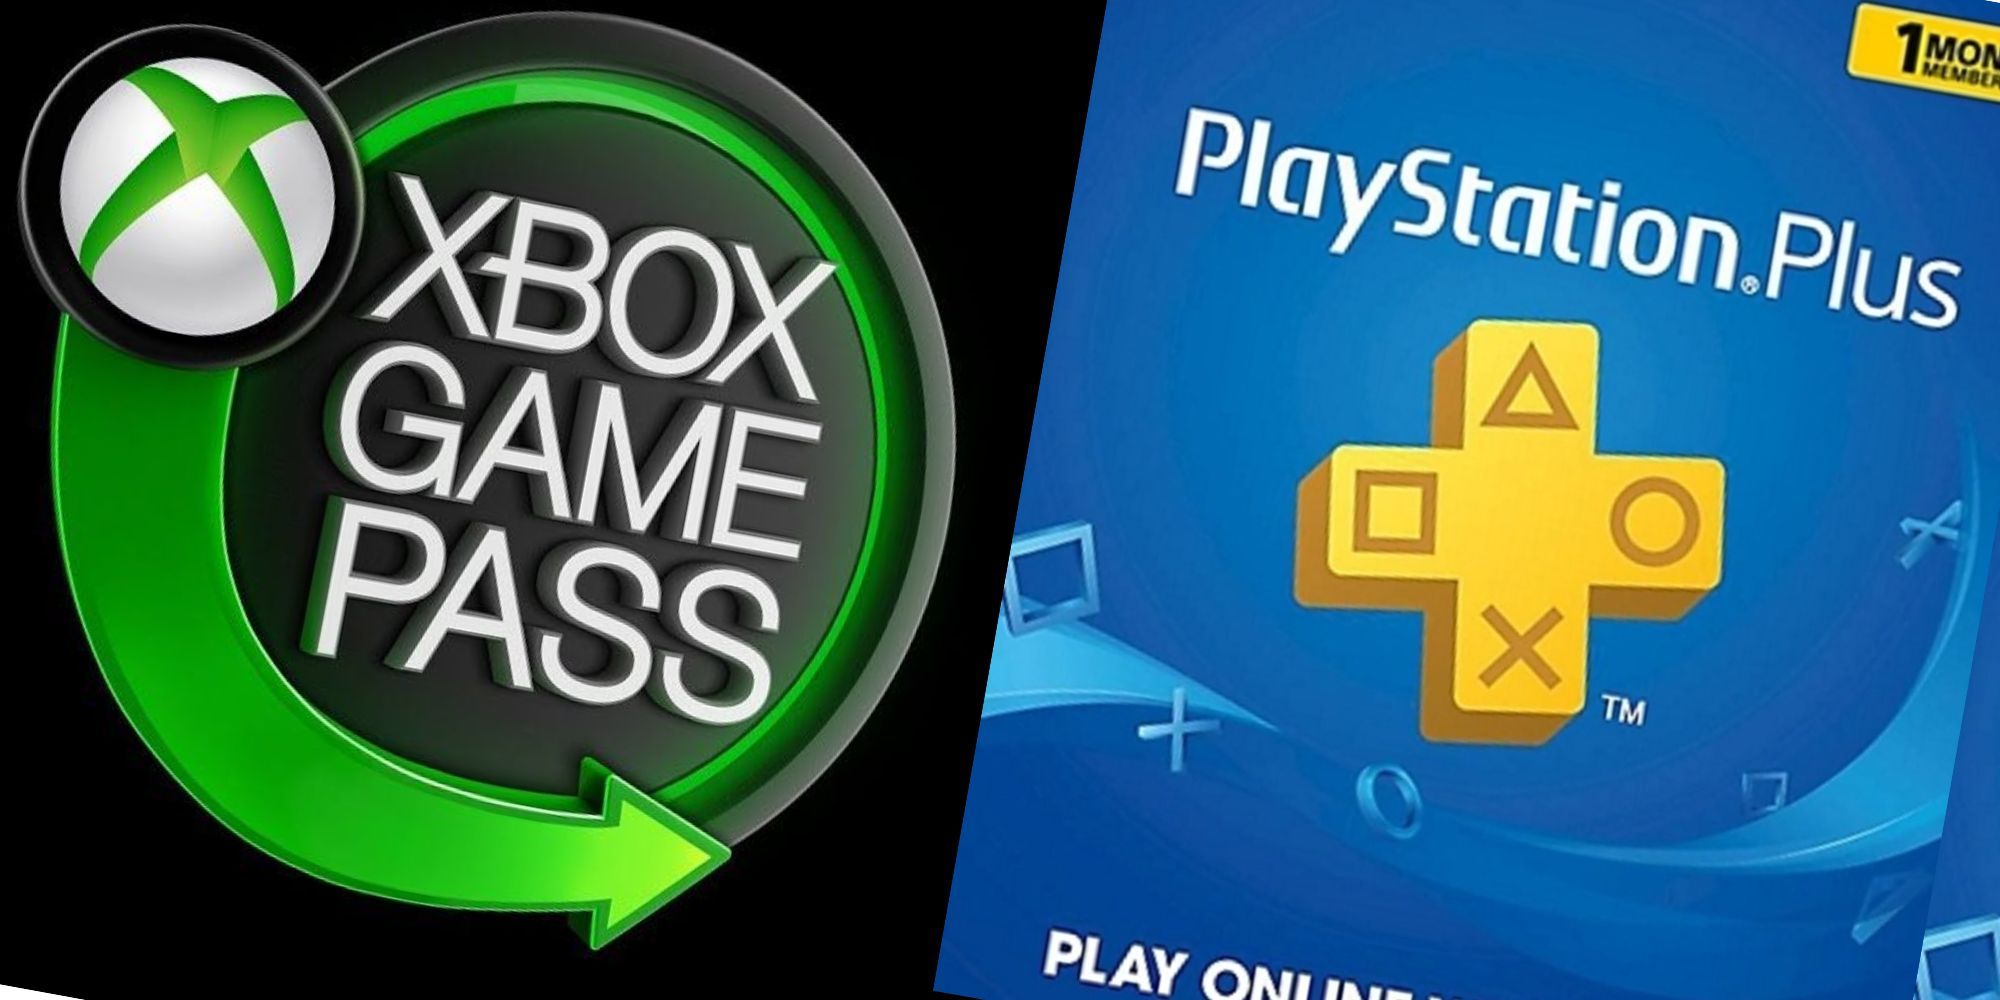 PS Plus and Xbox Game Pass are perfect gifts for any gamer